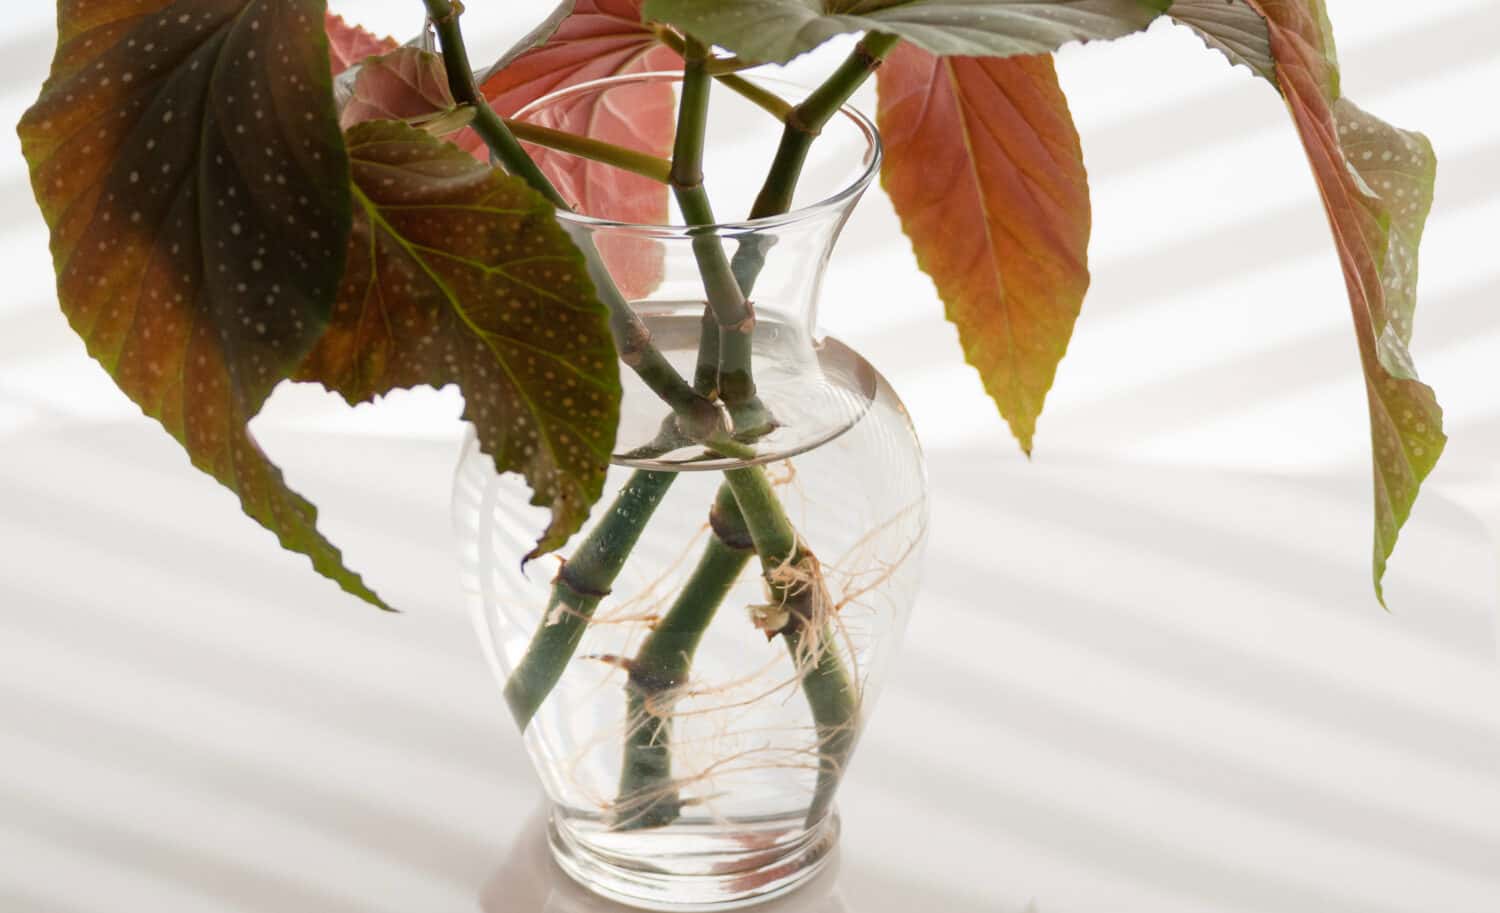 Three angel wing begonia stems growing new roots in water in a clear glass vase are reflected on a white background.